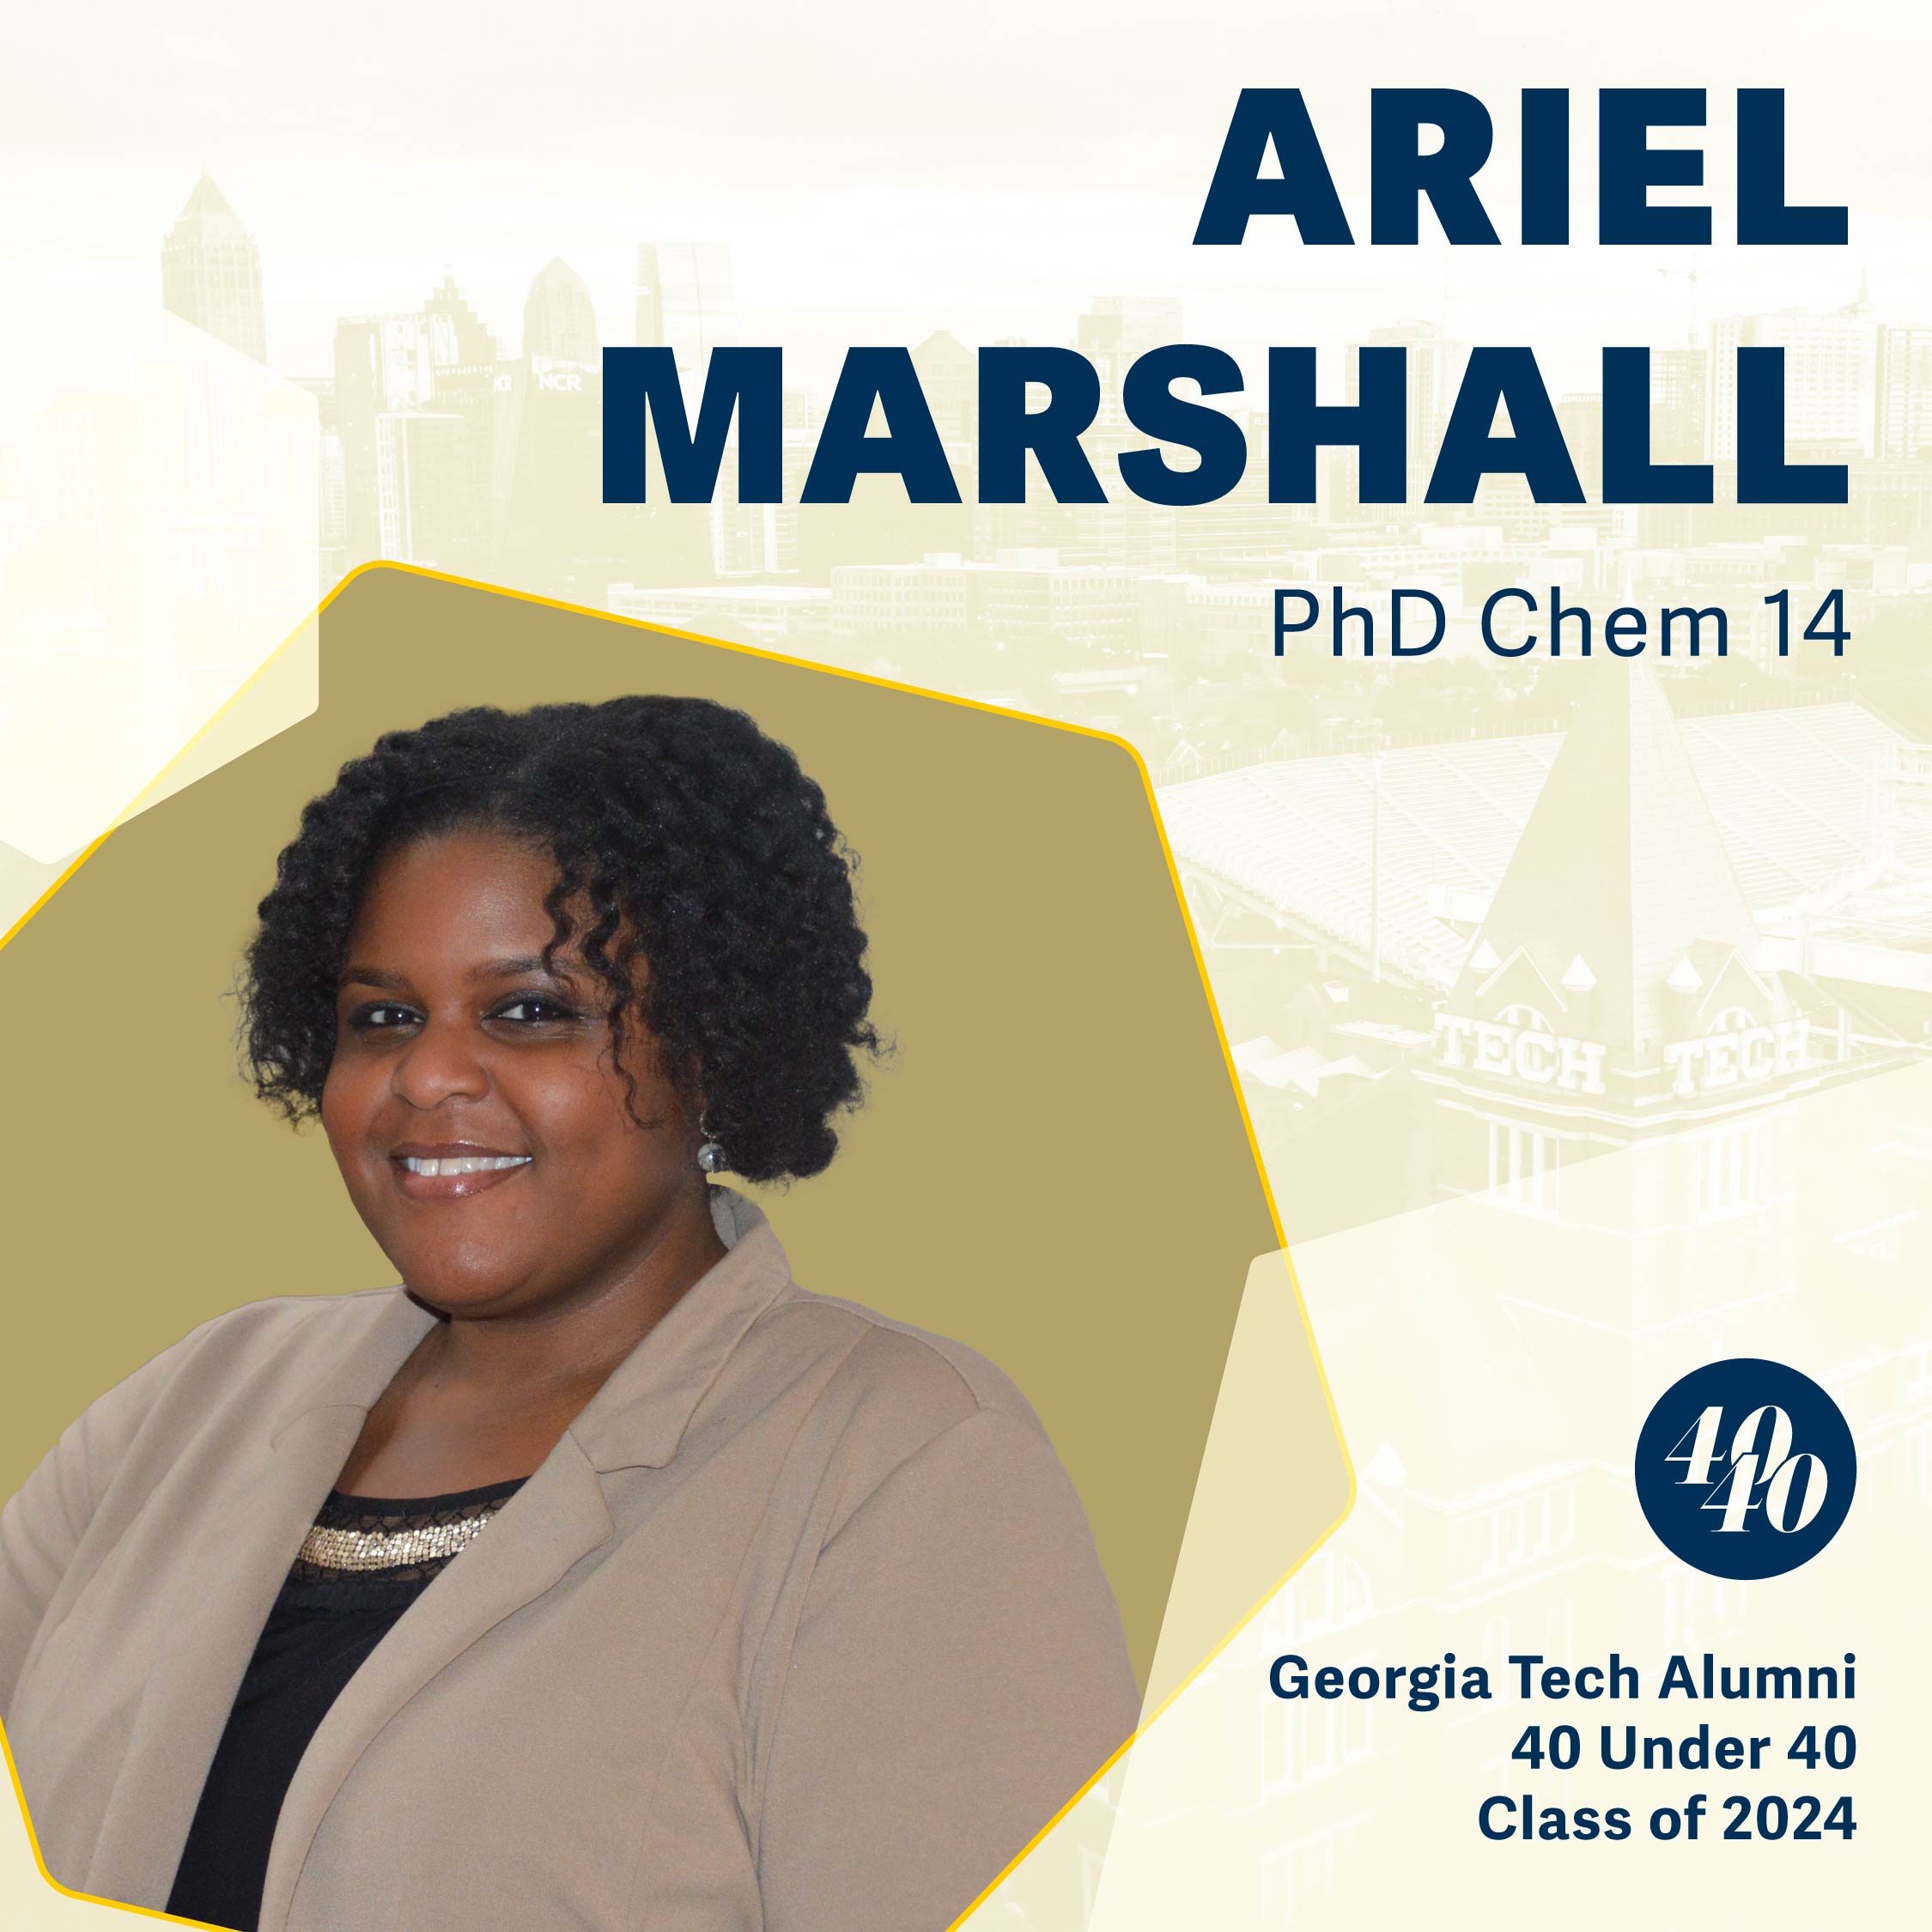 Ariel Marshall, Ph.D. CHEM 2014 (Chief of Staff, Office of the Under Secretary for Science and Innovation, U.S. Department of Energy)